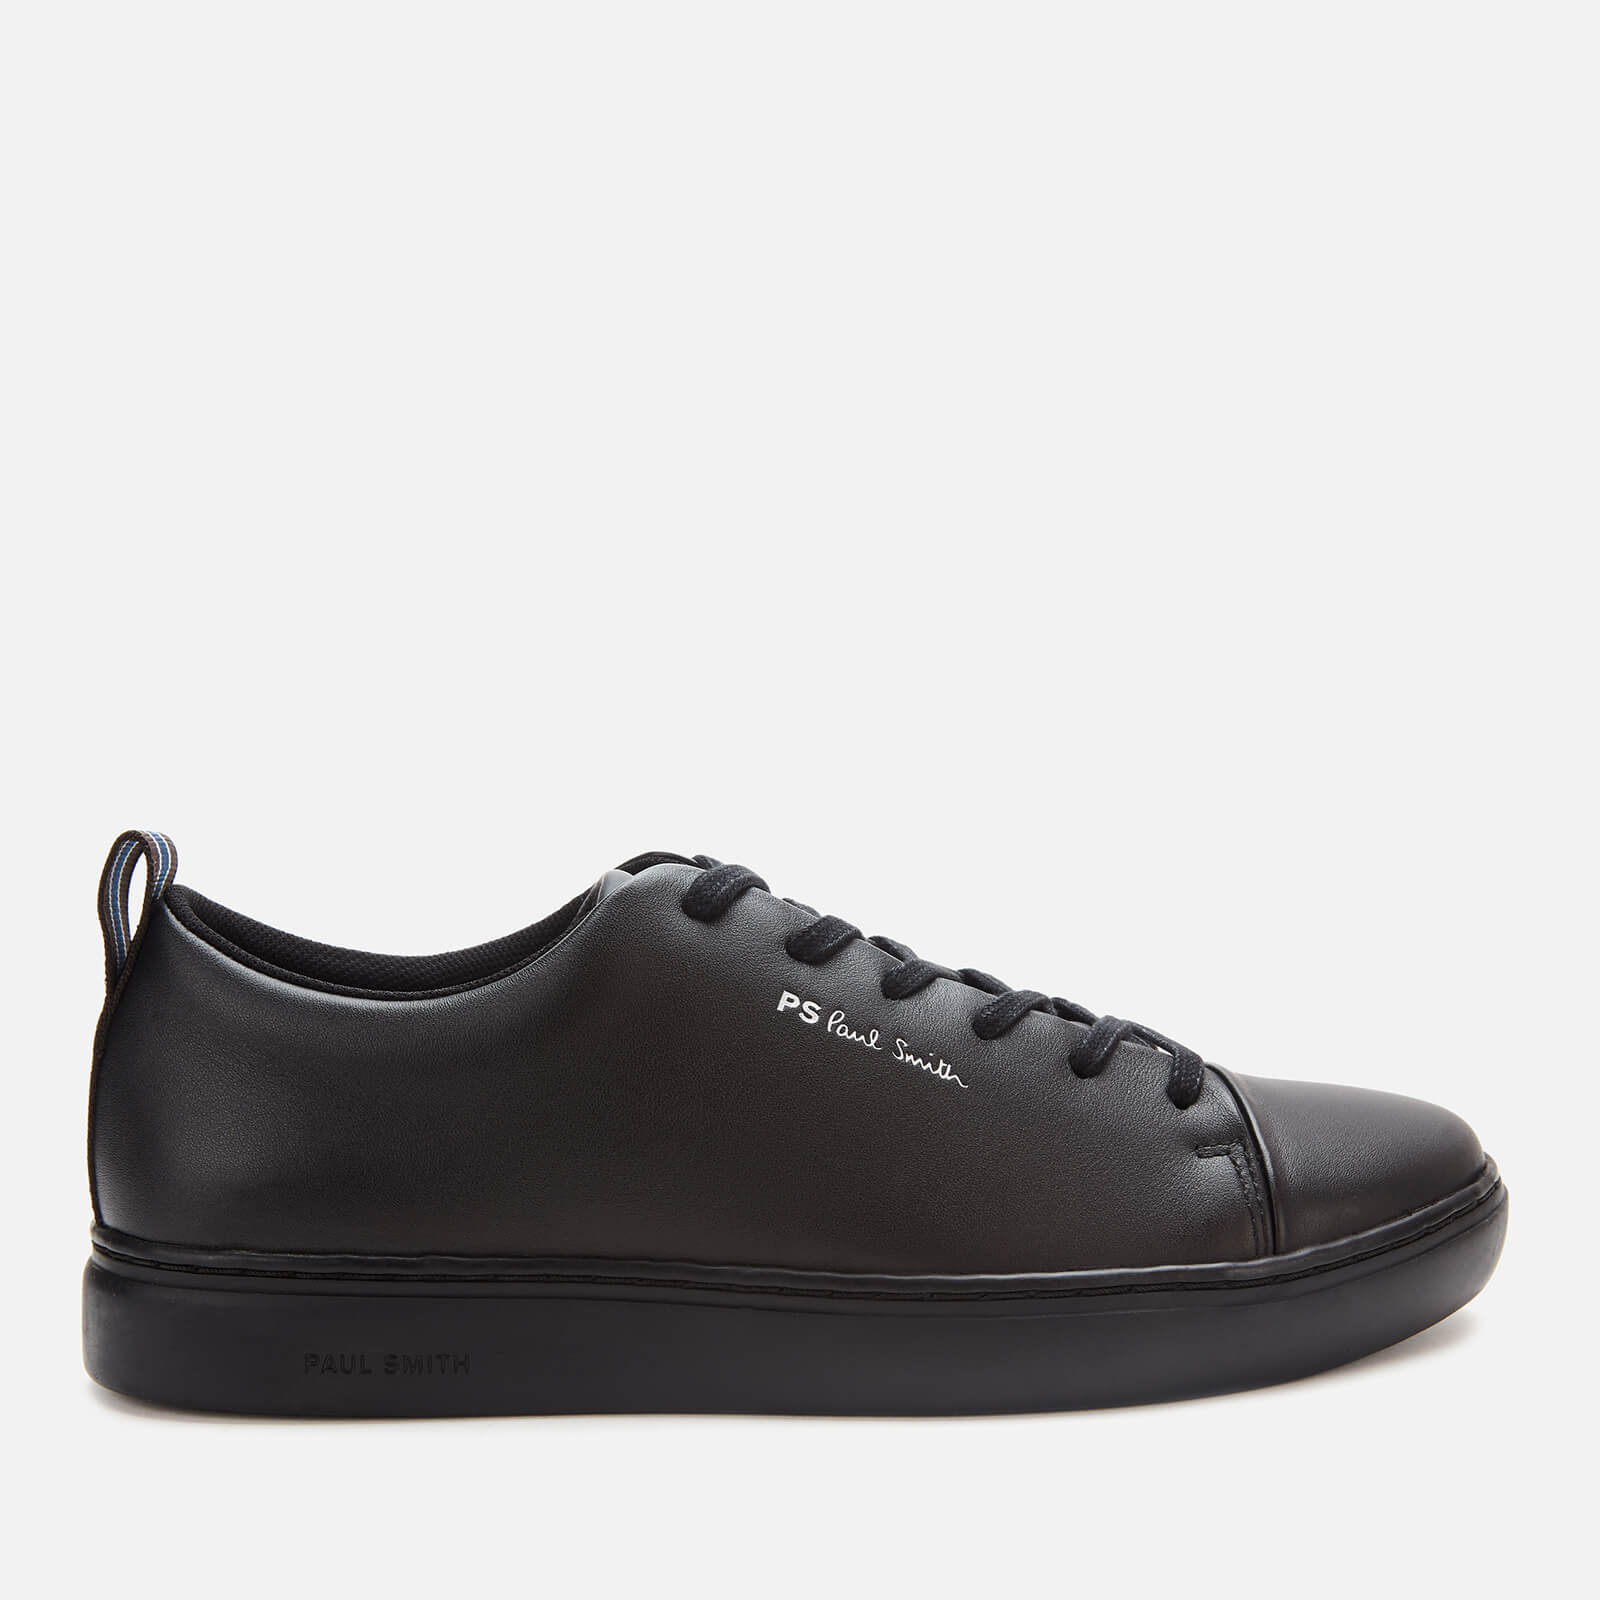 PS Paul Smith Men's Lee Leather Cupsole Trainers - Black - 8